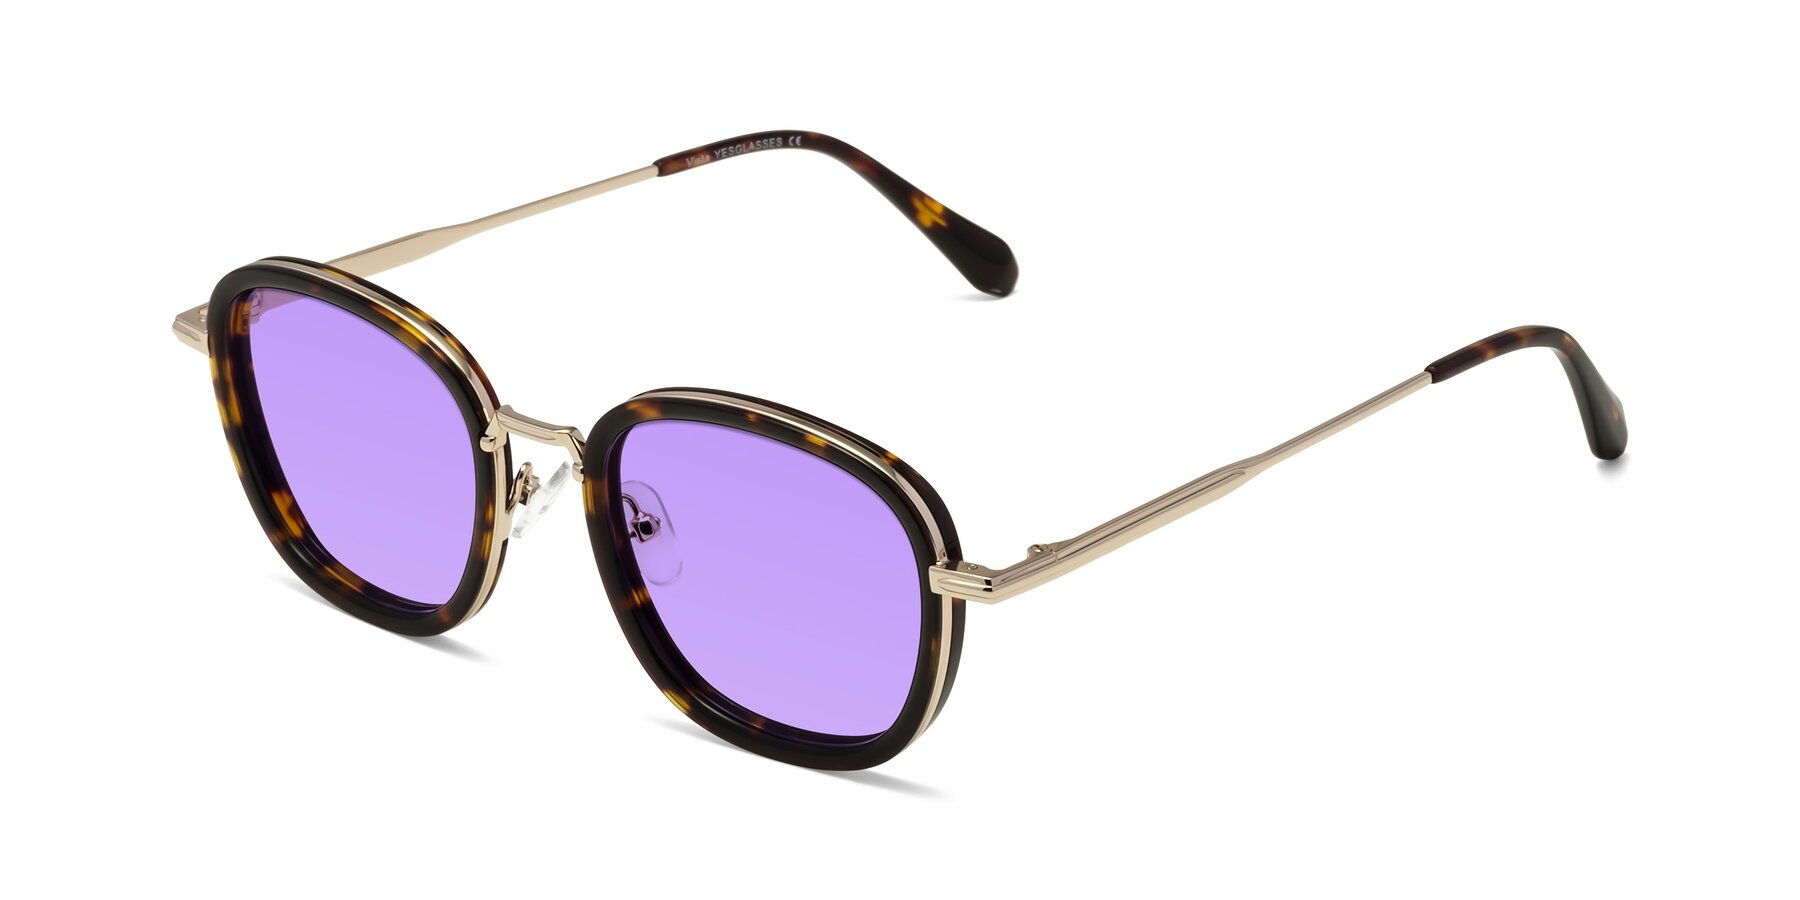 Angle of Vista in Tortoise-Light Gold with Medium Purple Tinted Lenses